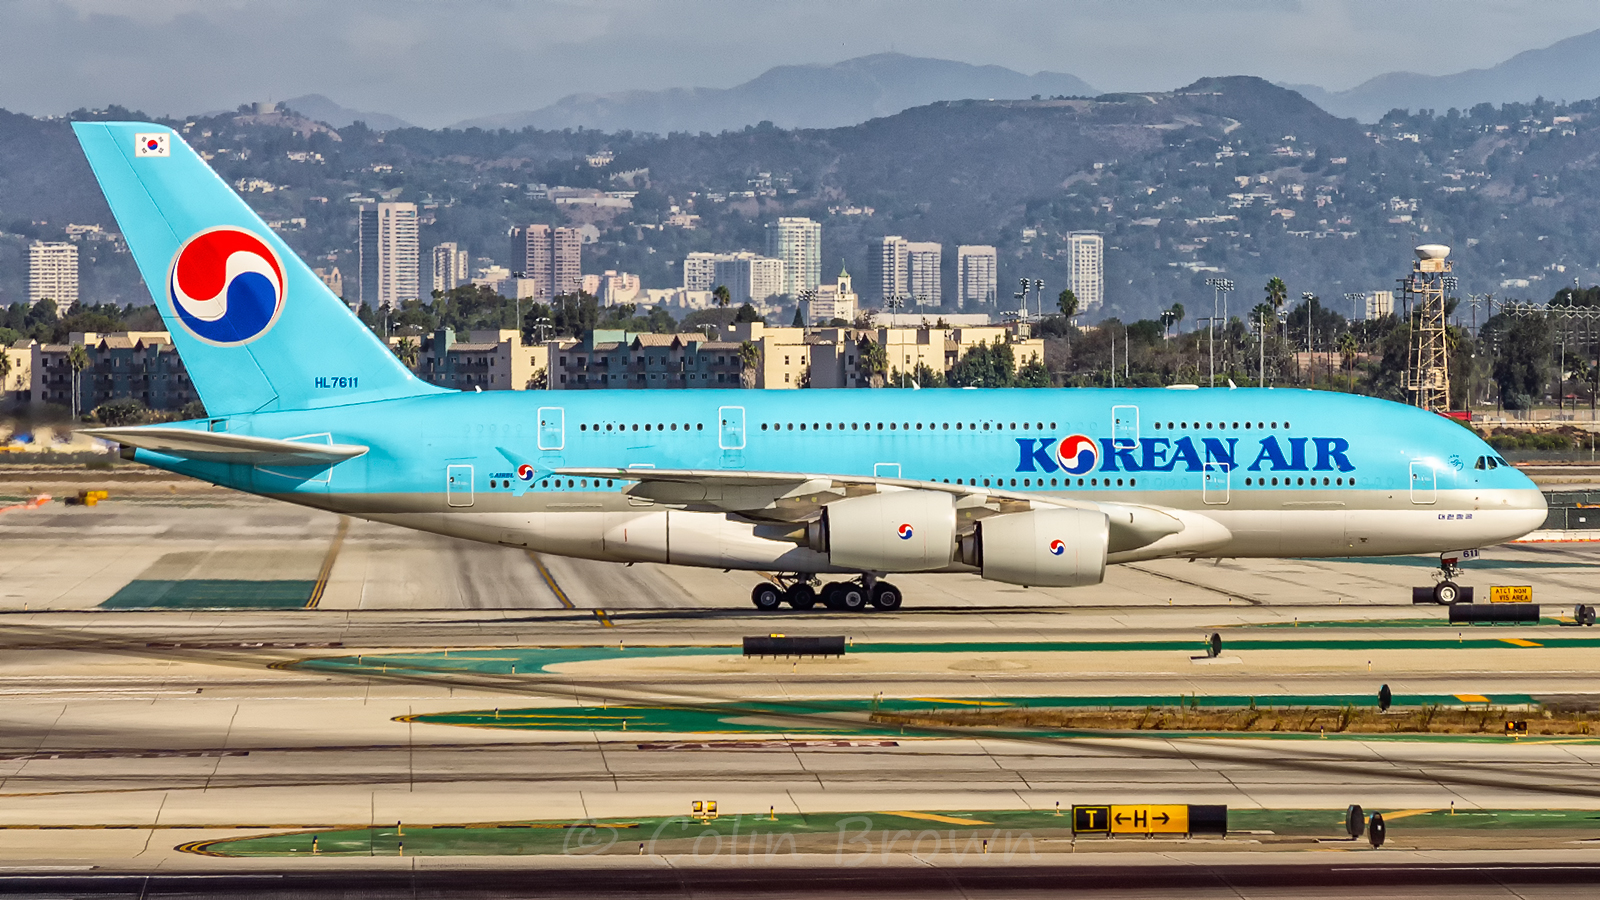 Korean airline company due to pandemic launches flights "to nowhere"